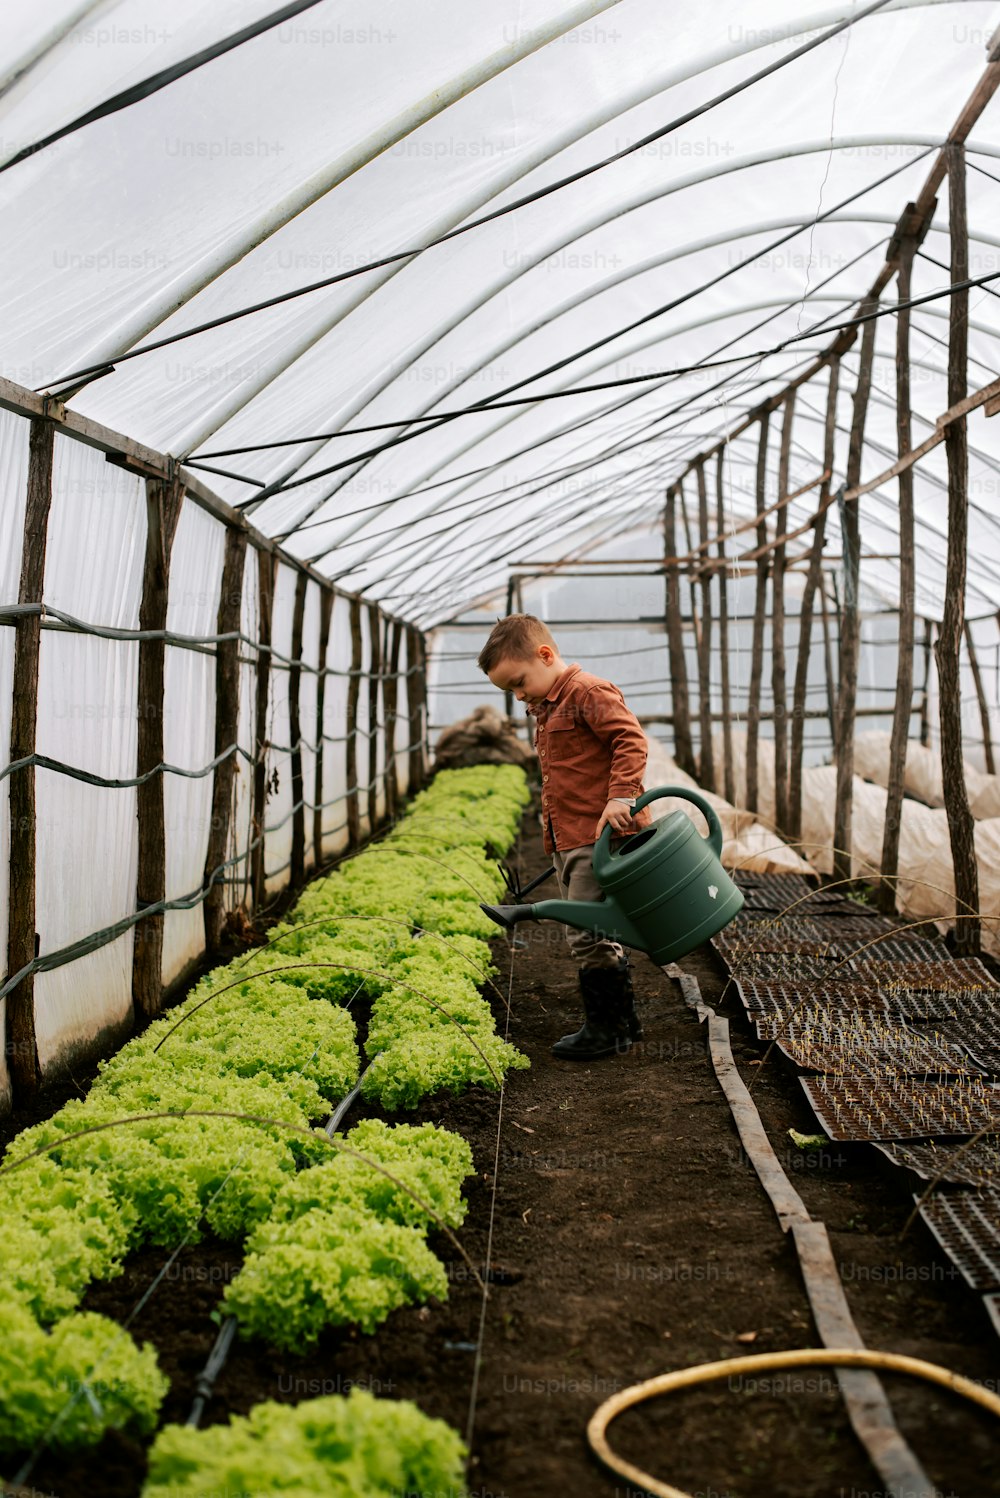 a young boy watering lettuce in a greenhouse